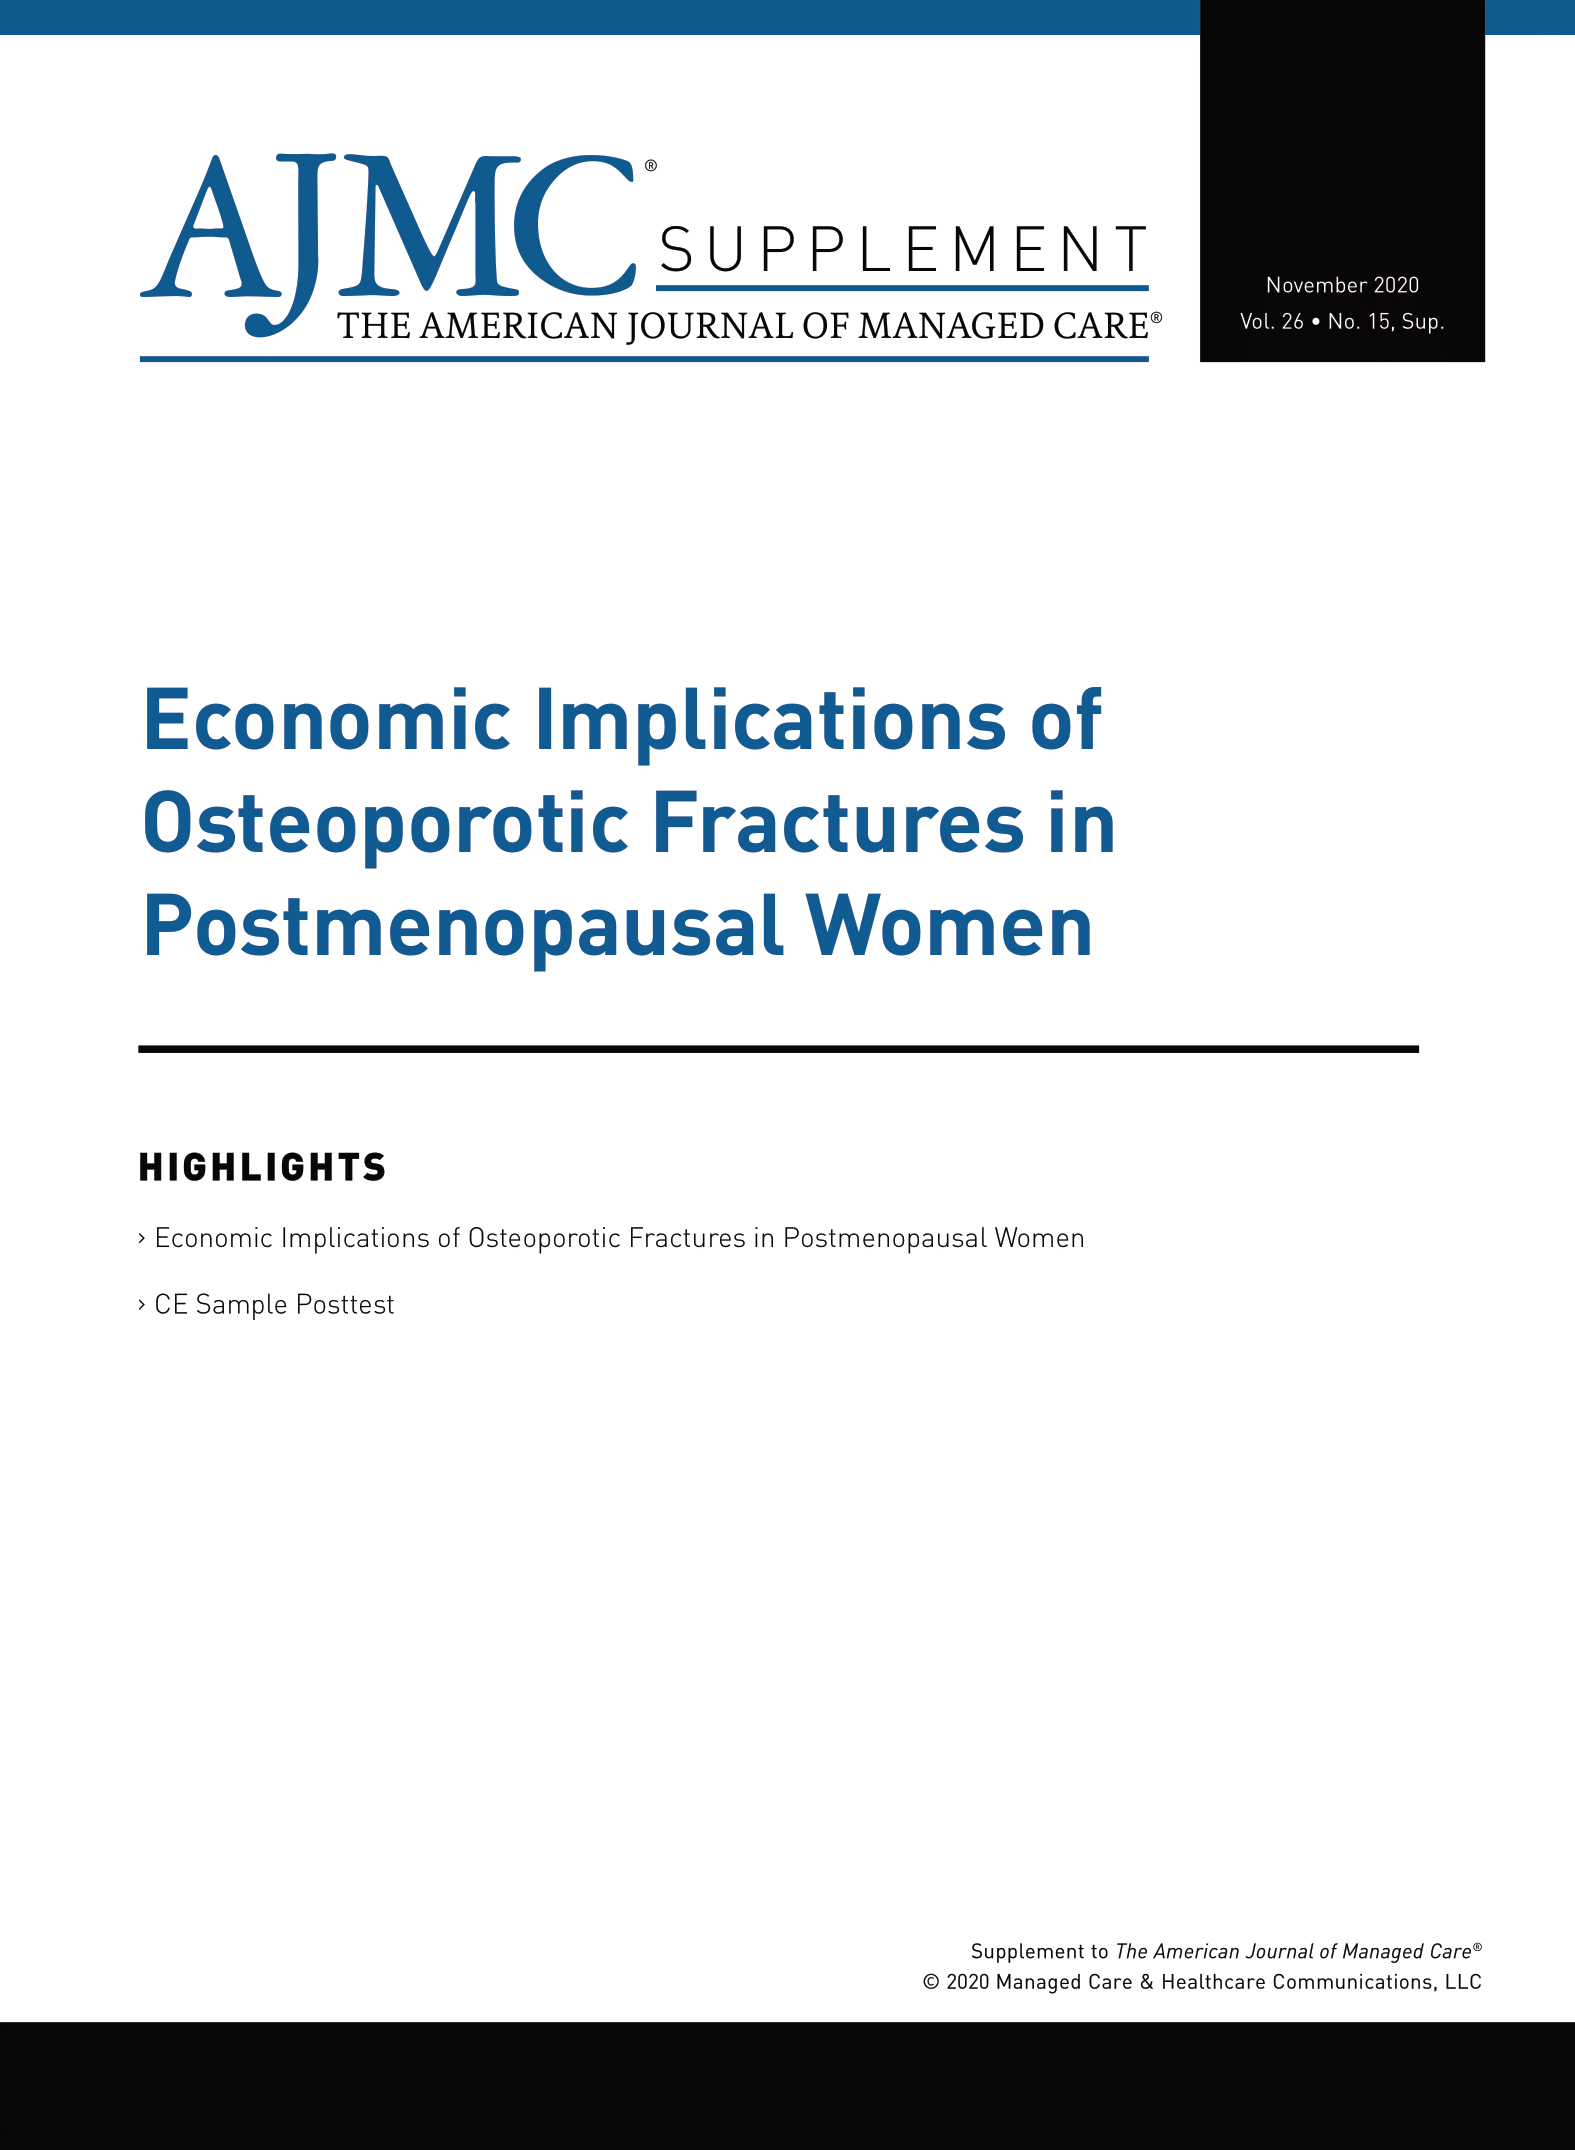 Economic Implications of Osteoporotic Fractures in Postmenopausal Women